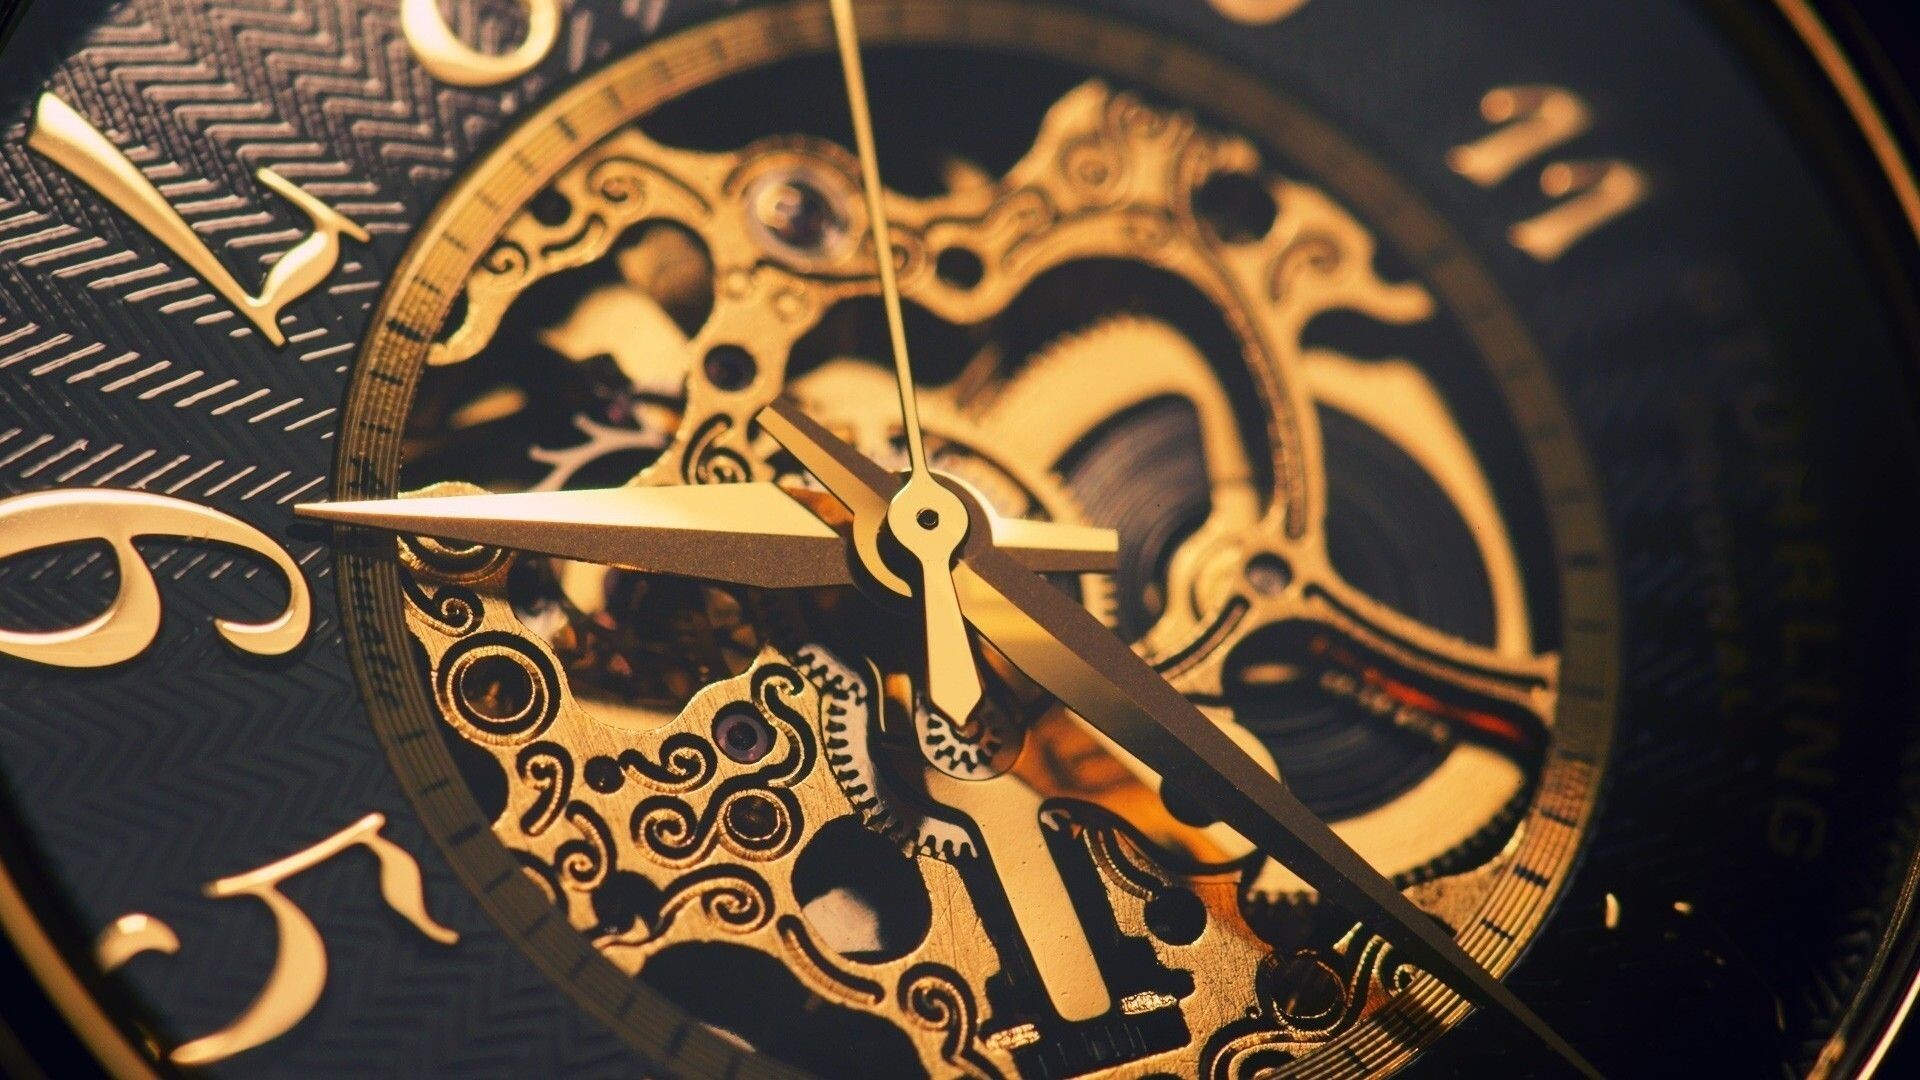 Gear: Clock, A device consisting of connecting sets of wheels with teeth around the edge. 1920x1080 Full HD Wallpaper.